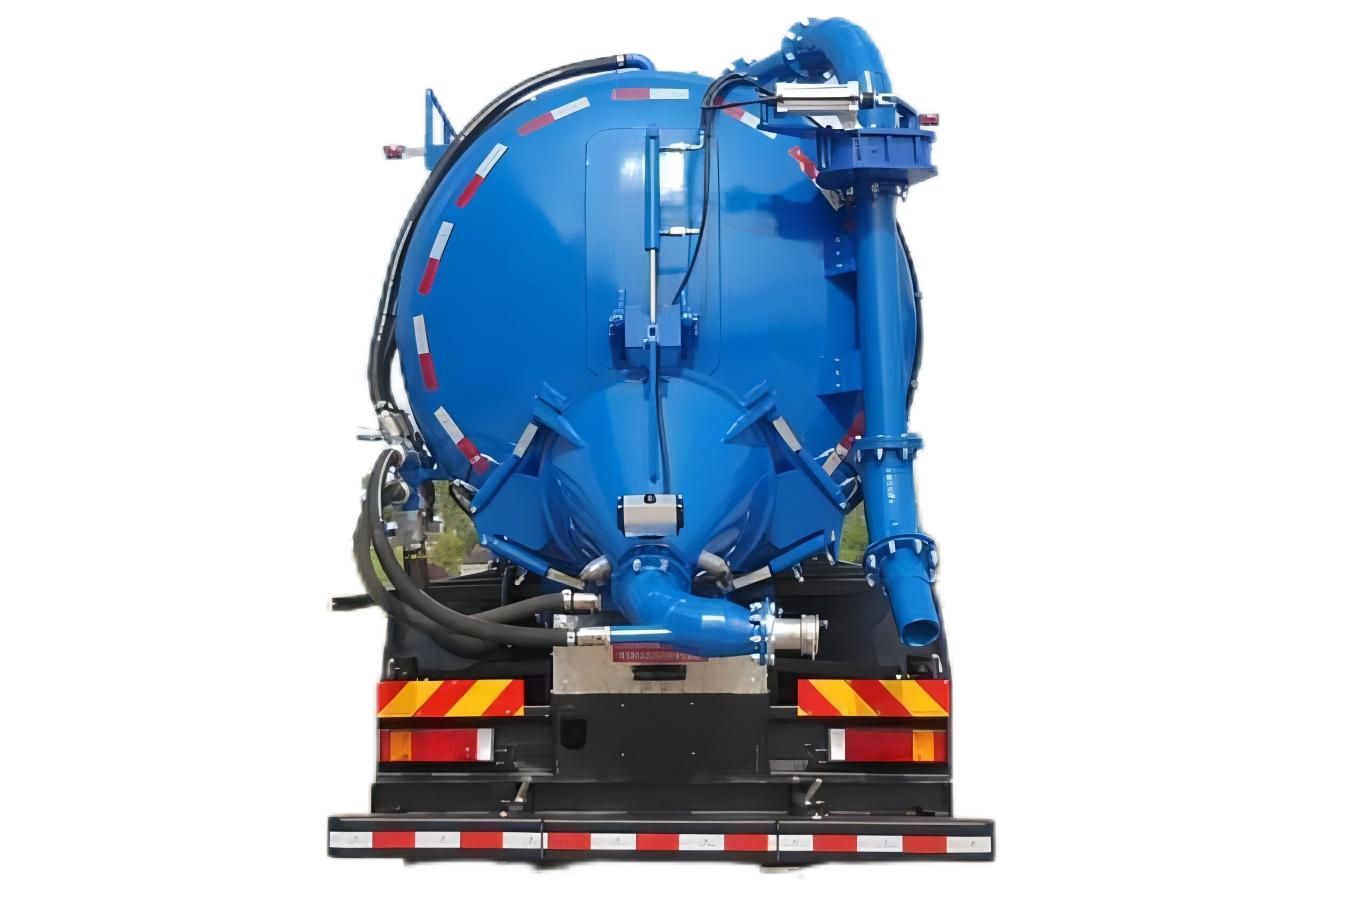 Customize Dongfeng Dry Hydrated Lime Powder Supersucker Vacuum Tanker Trucks 23m3